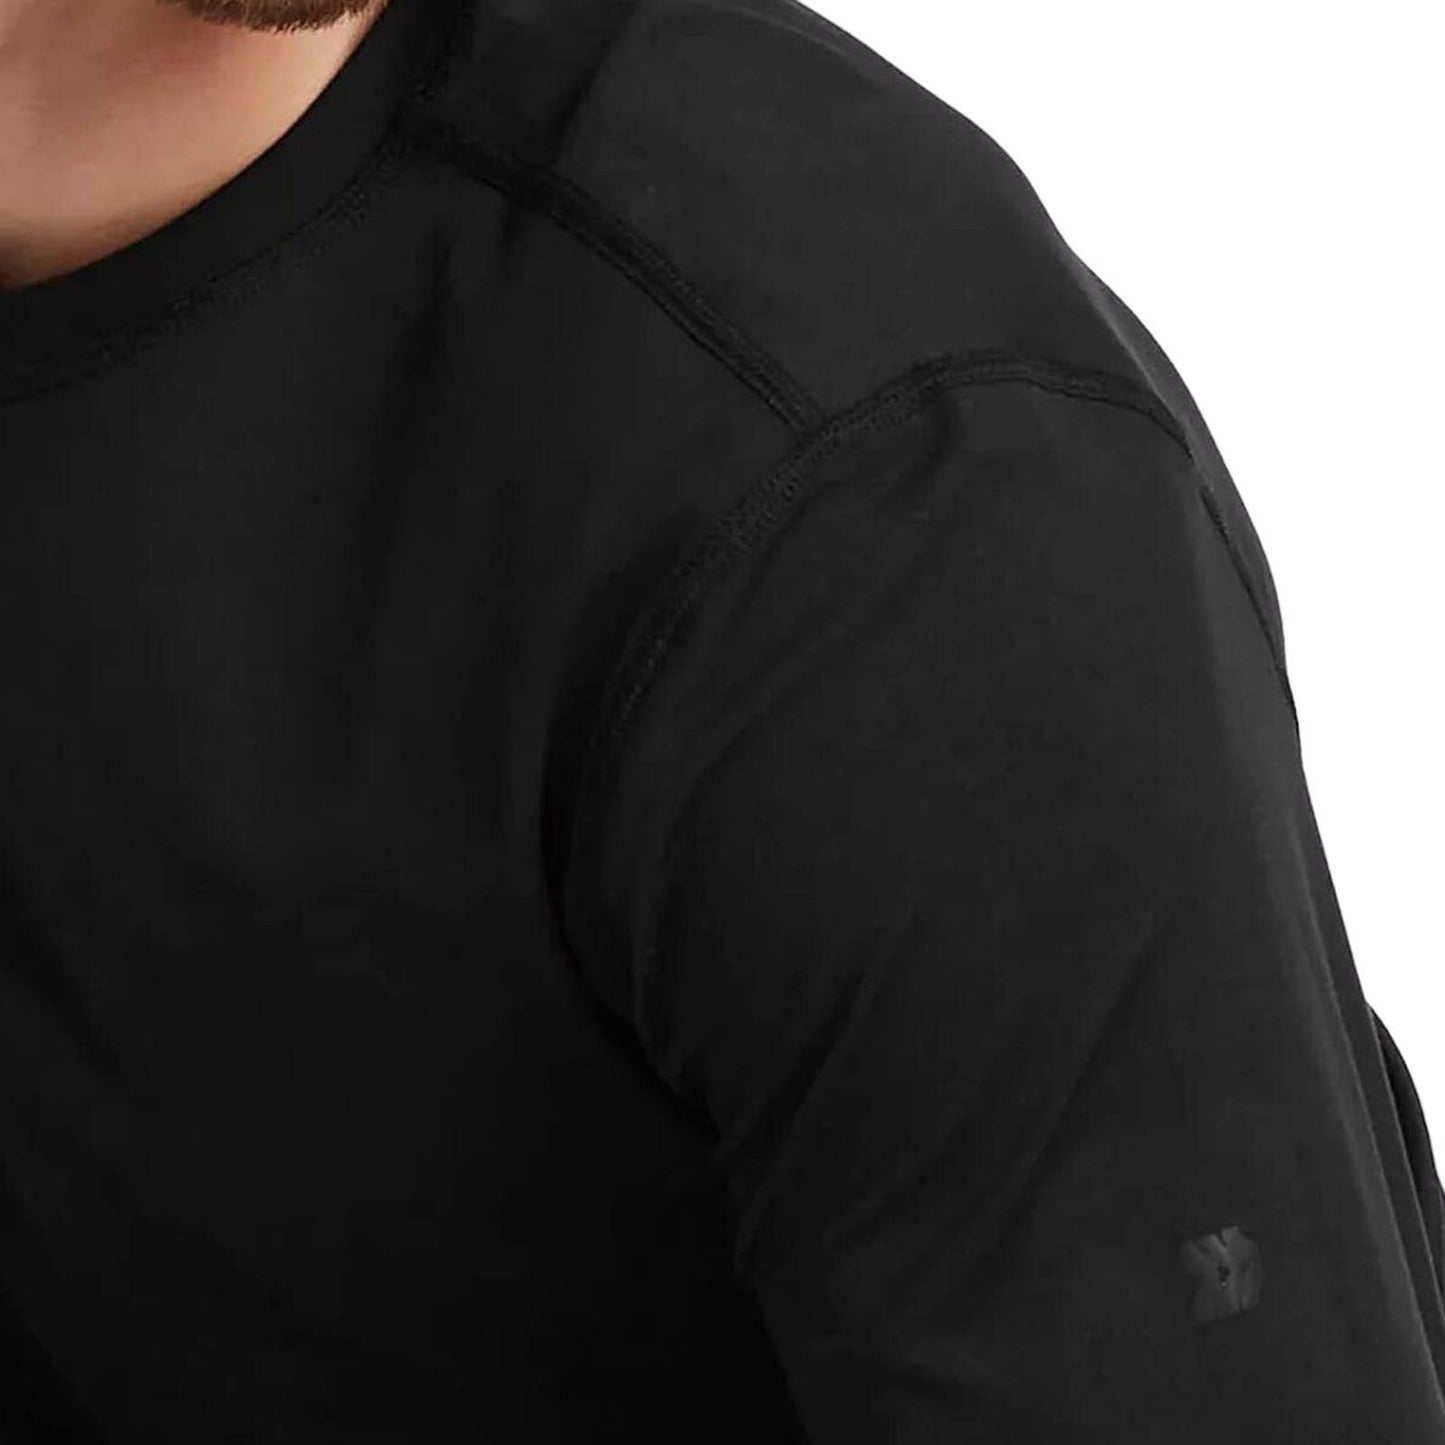 Men's Fitted Long Sleeve T-Shirt - All in Motion Black X-LRG XL